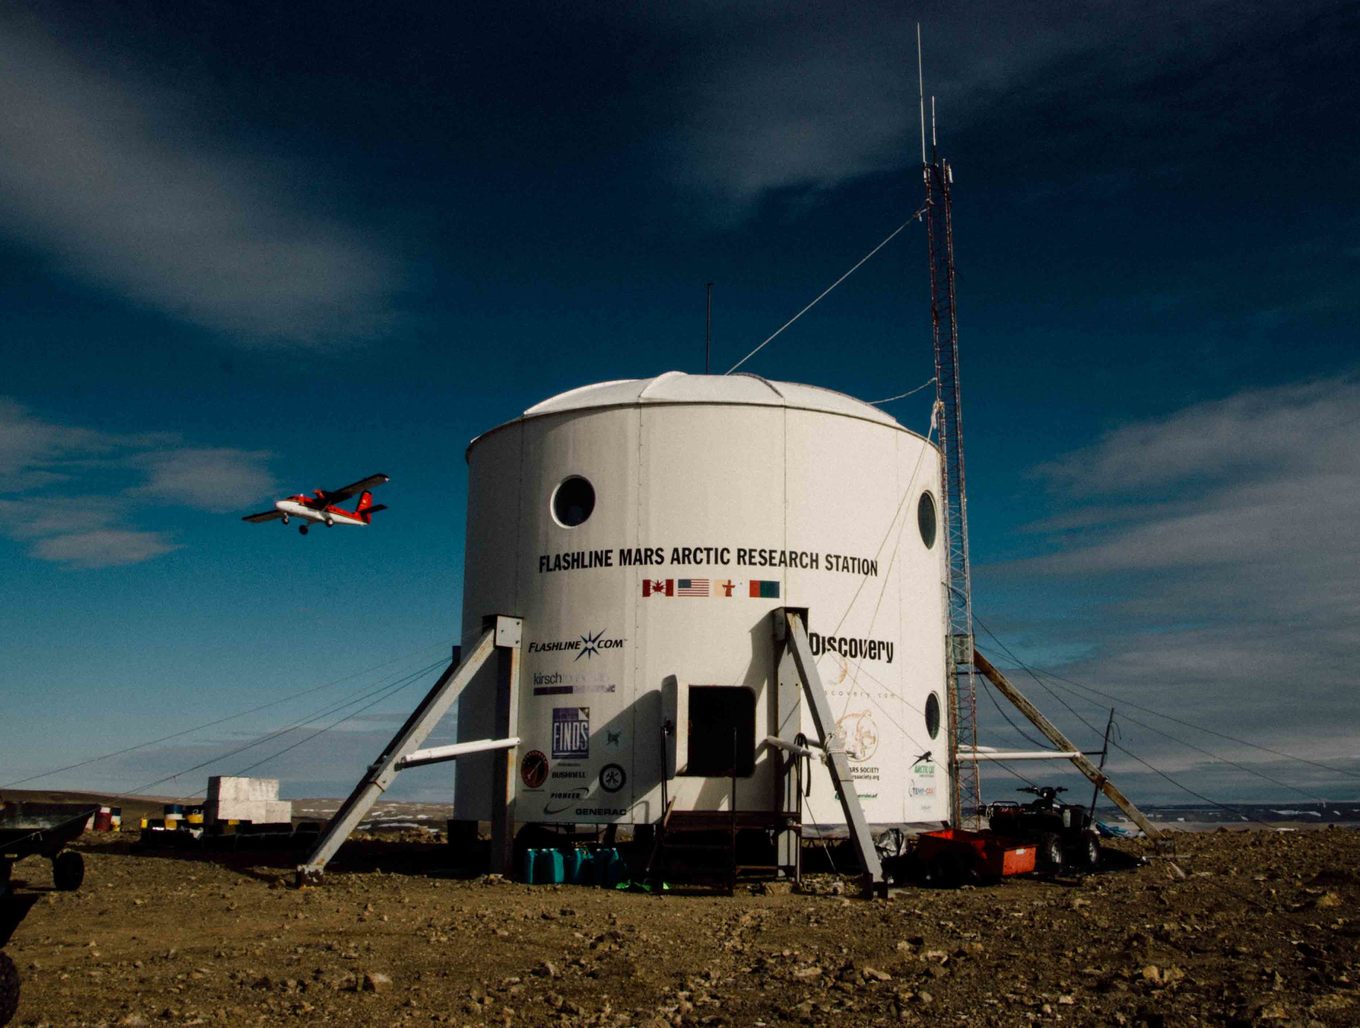 A twin otter aircraft flying over the Flashline Mars Arctic Research Station on Devon Island. (Mars Society)